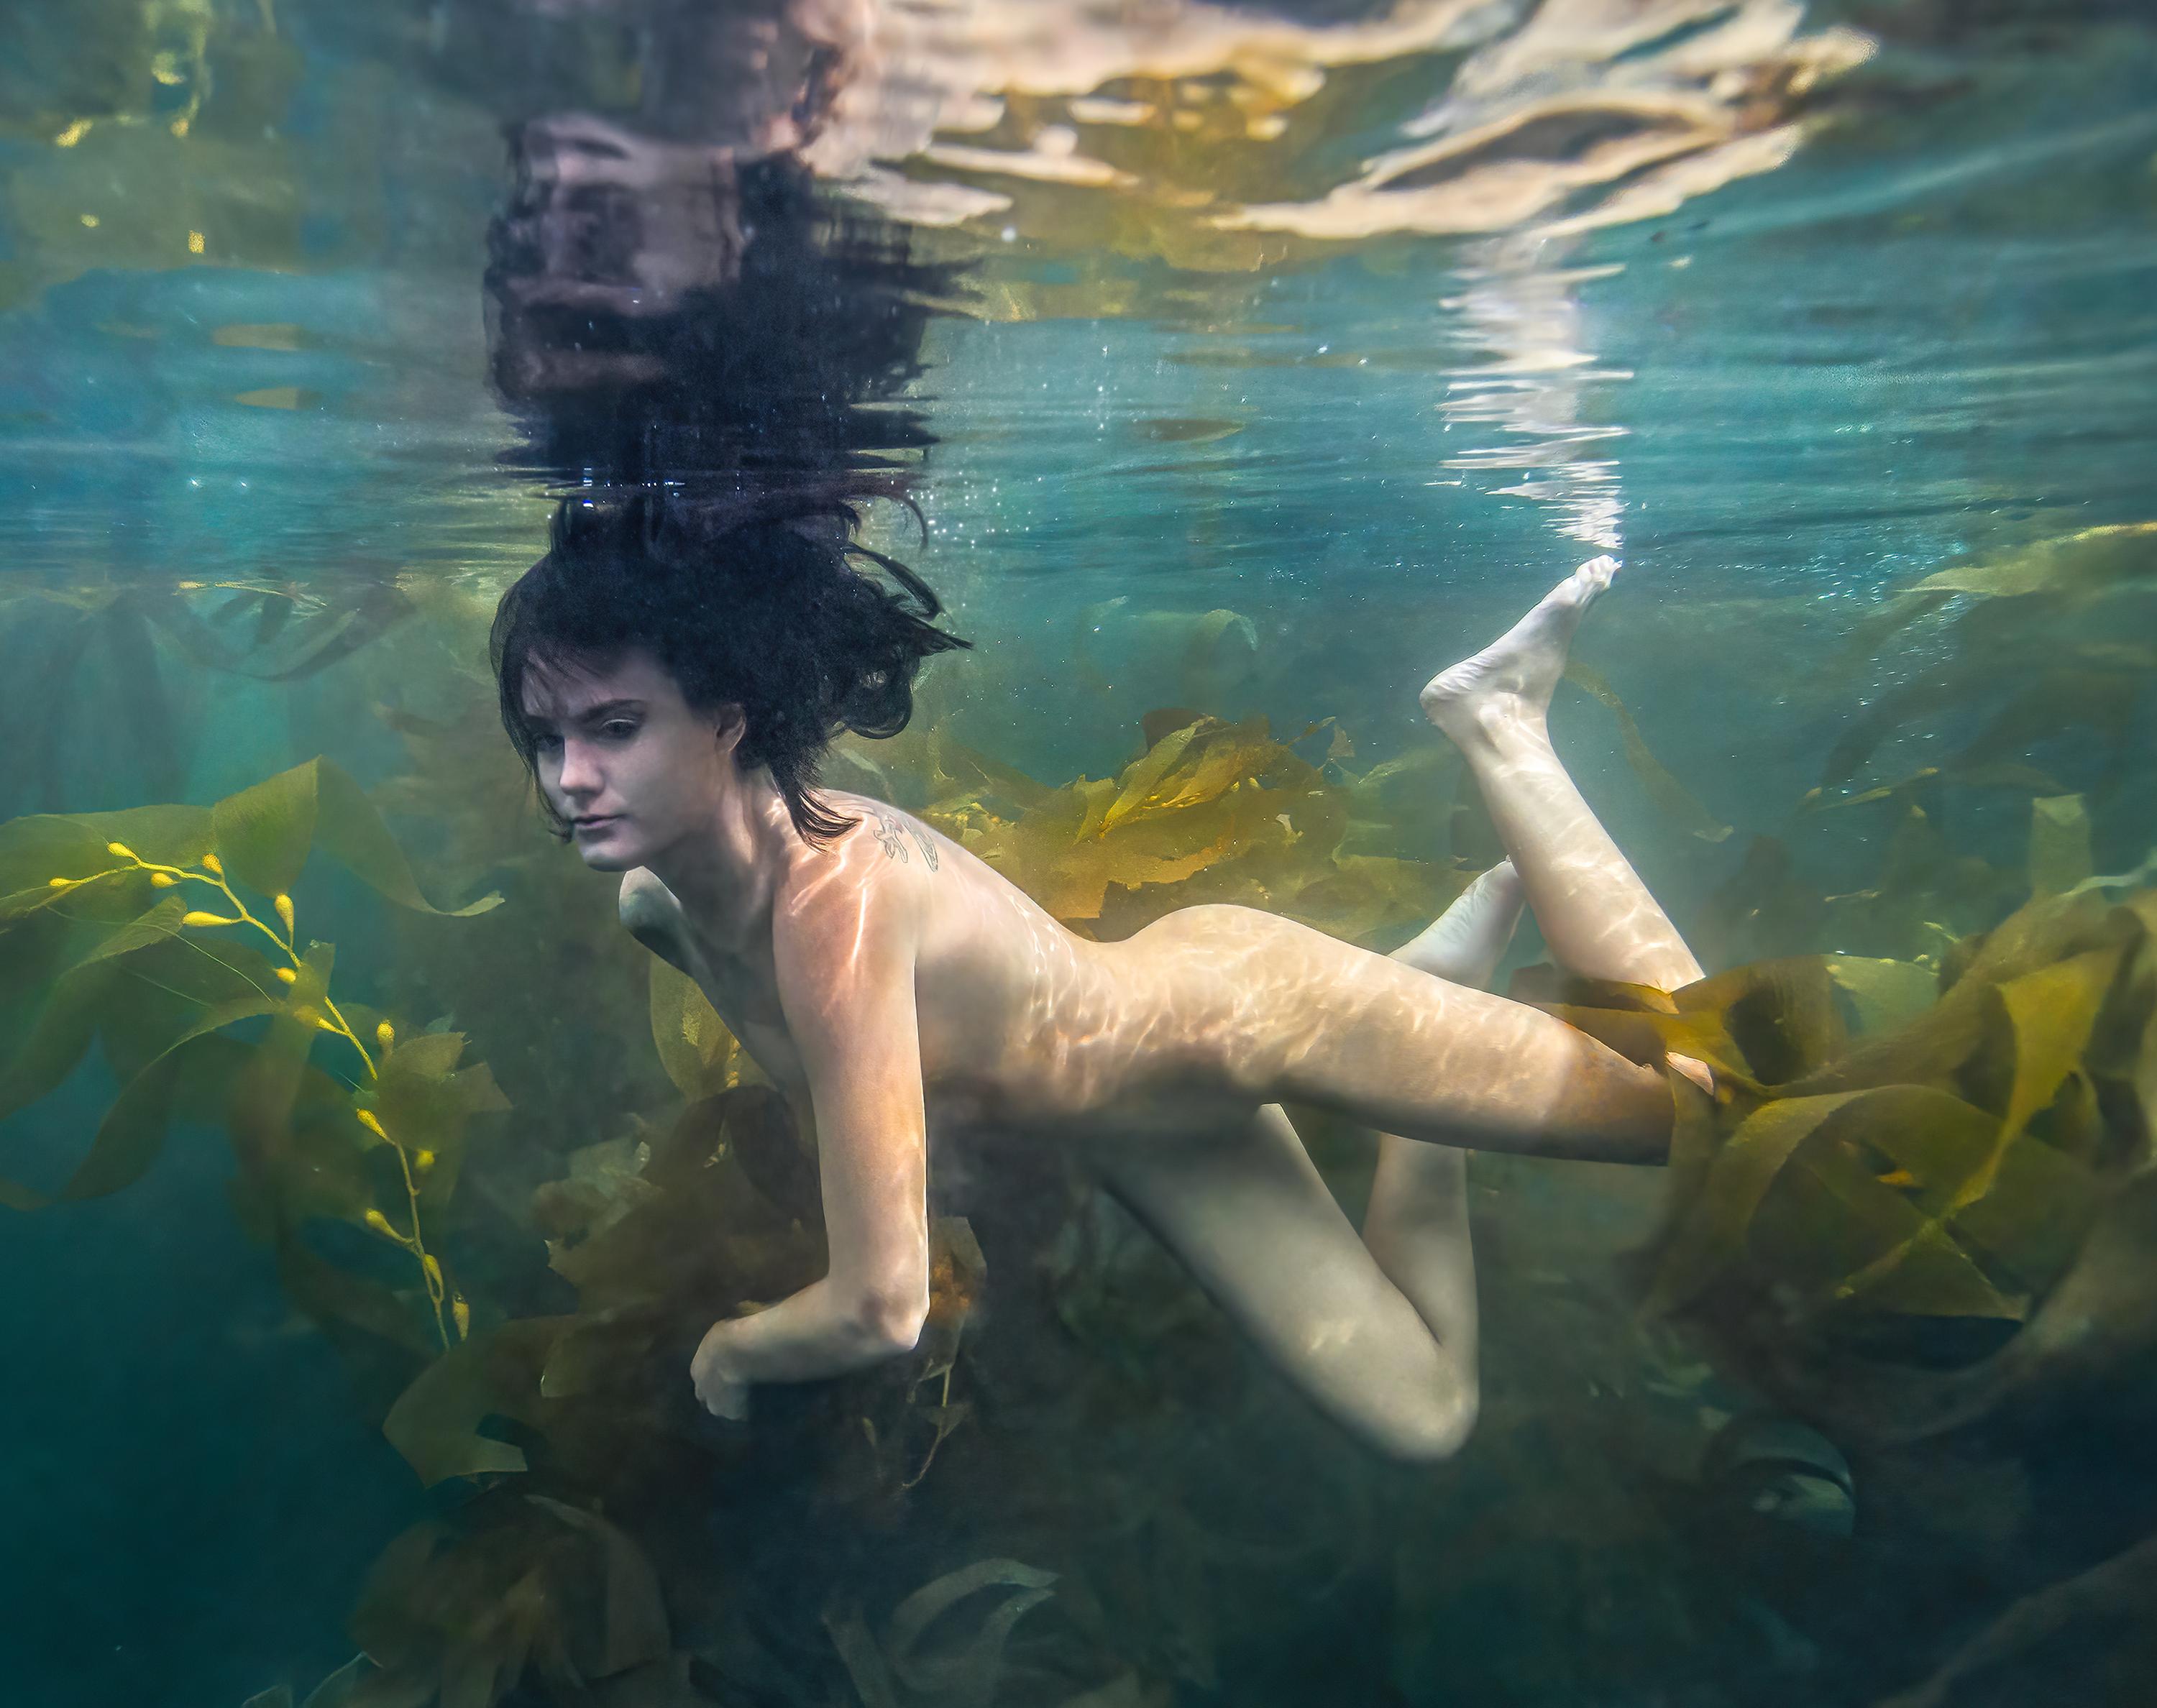 Kelp Mermaid - underwater nude photograph - archival pigment print - Photograph by Alex Sher